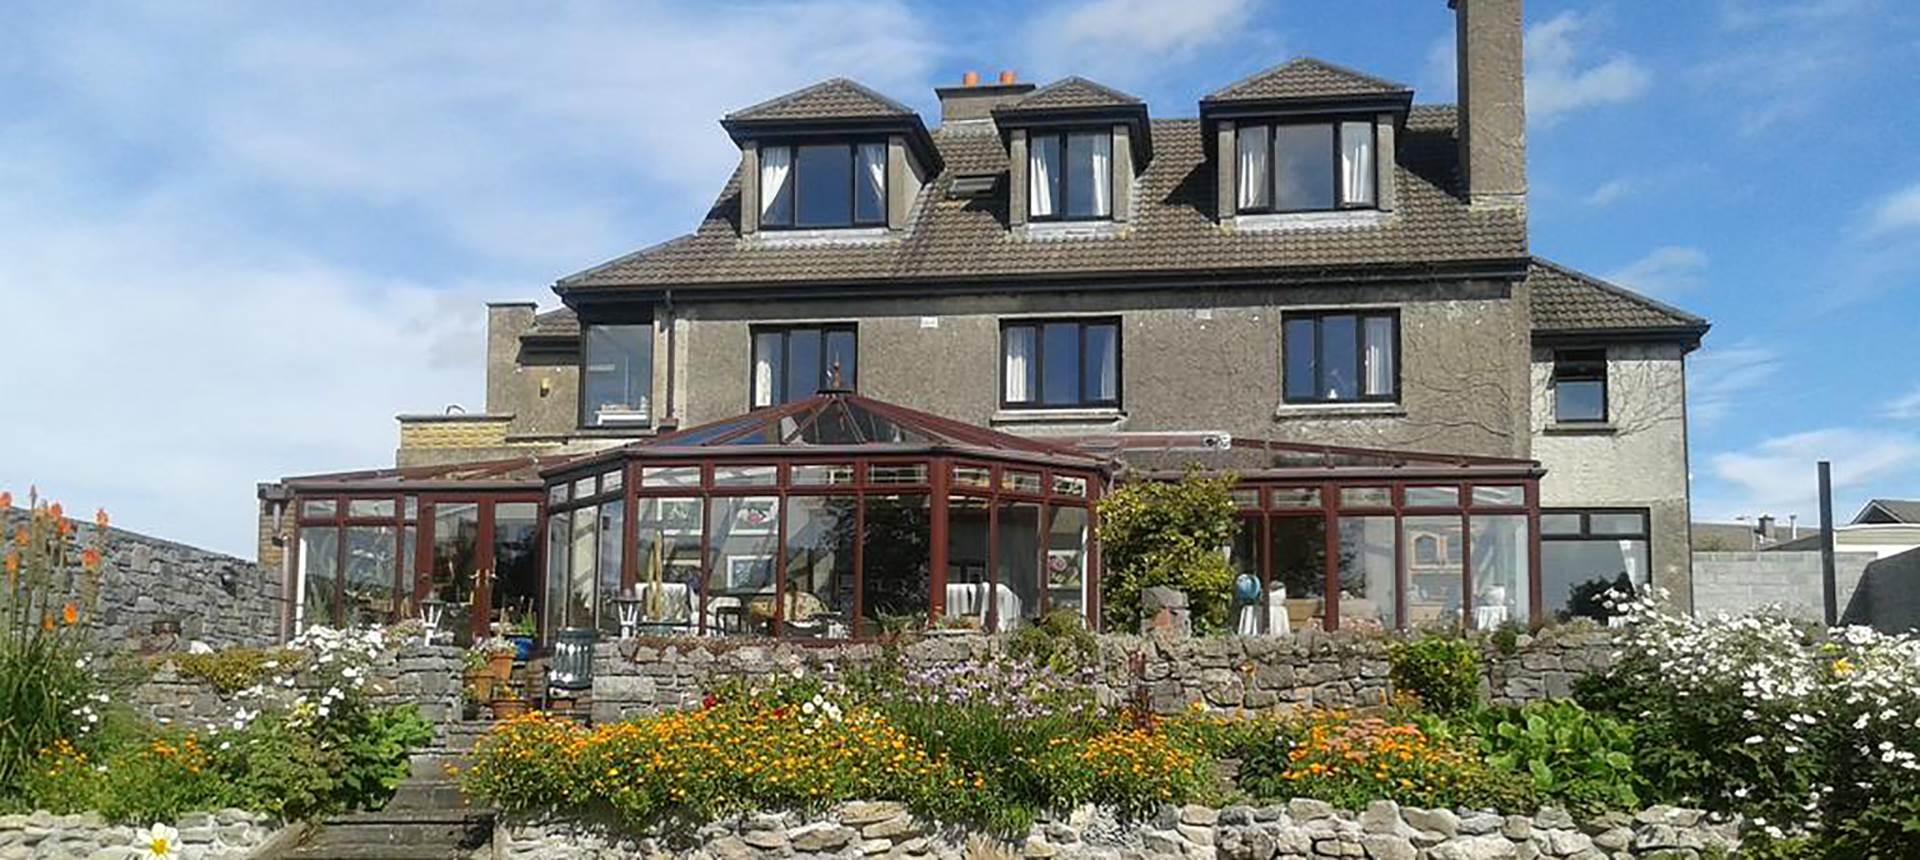 Four Winds Lodge Bed and Breakfast Galway Ireland